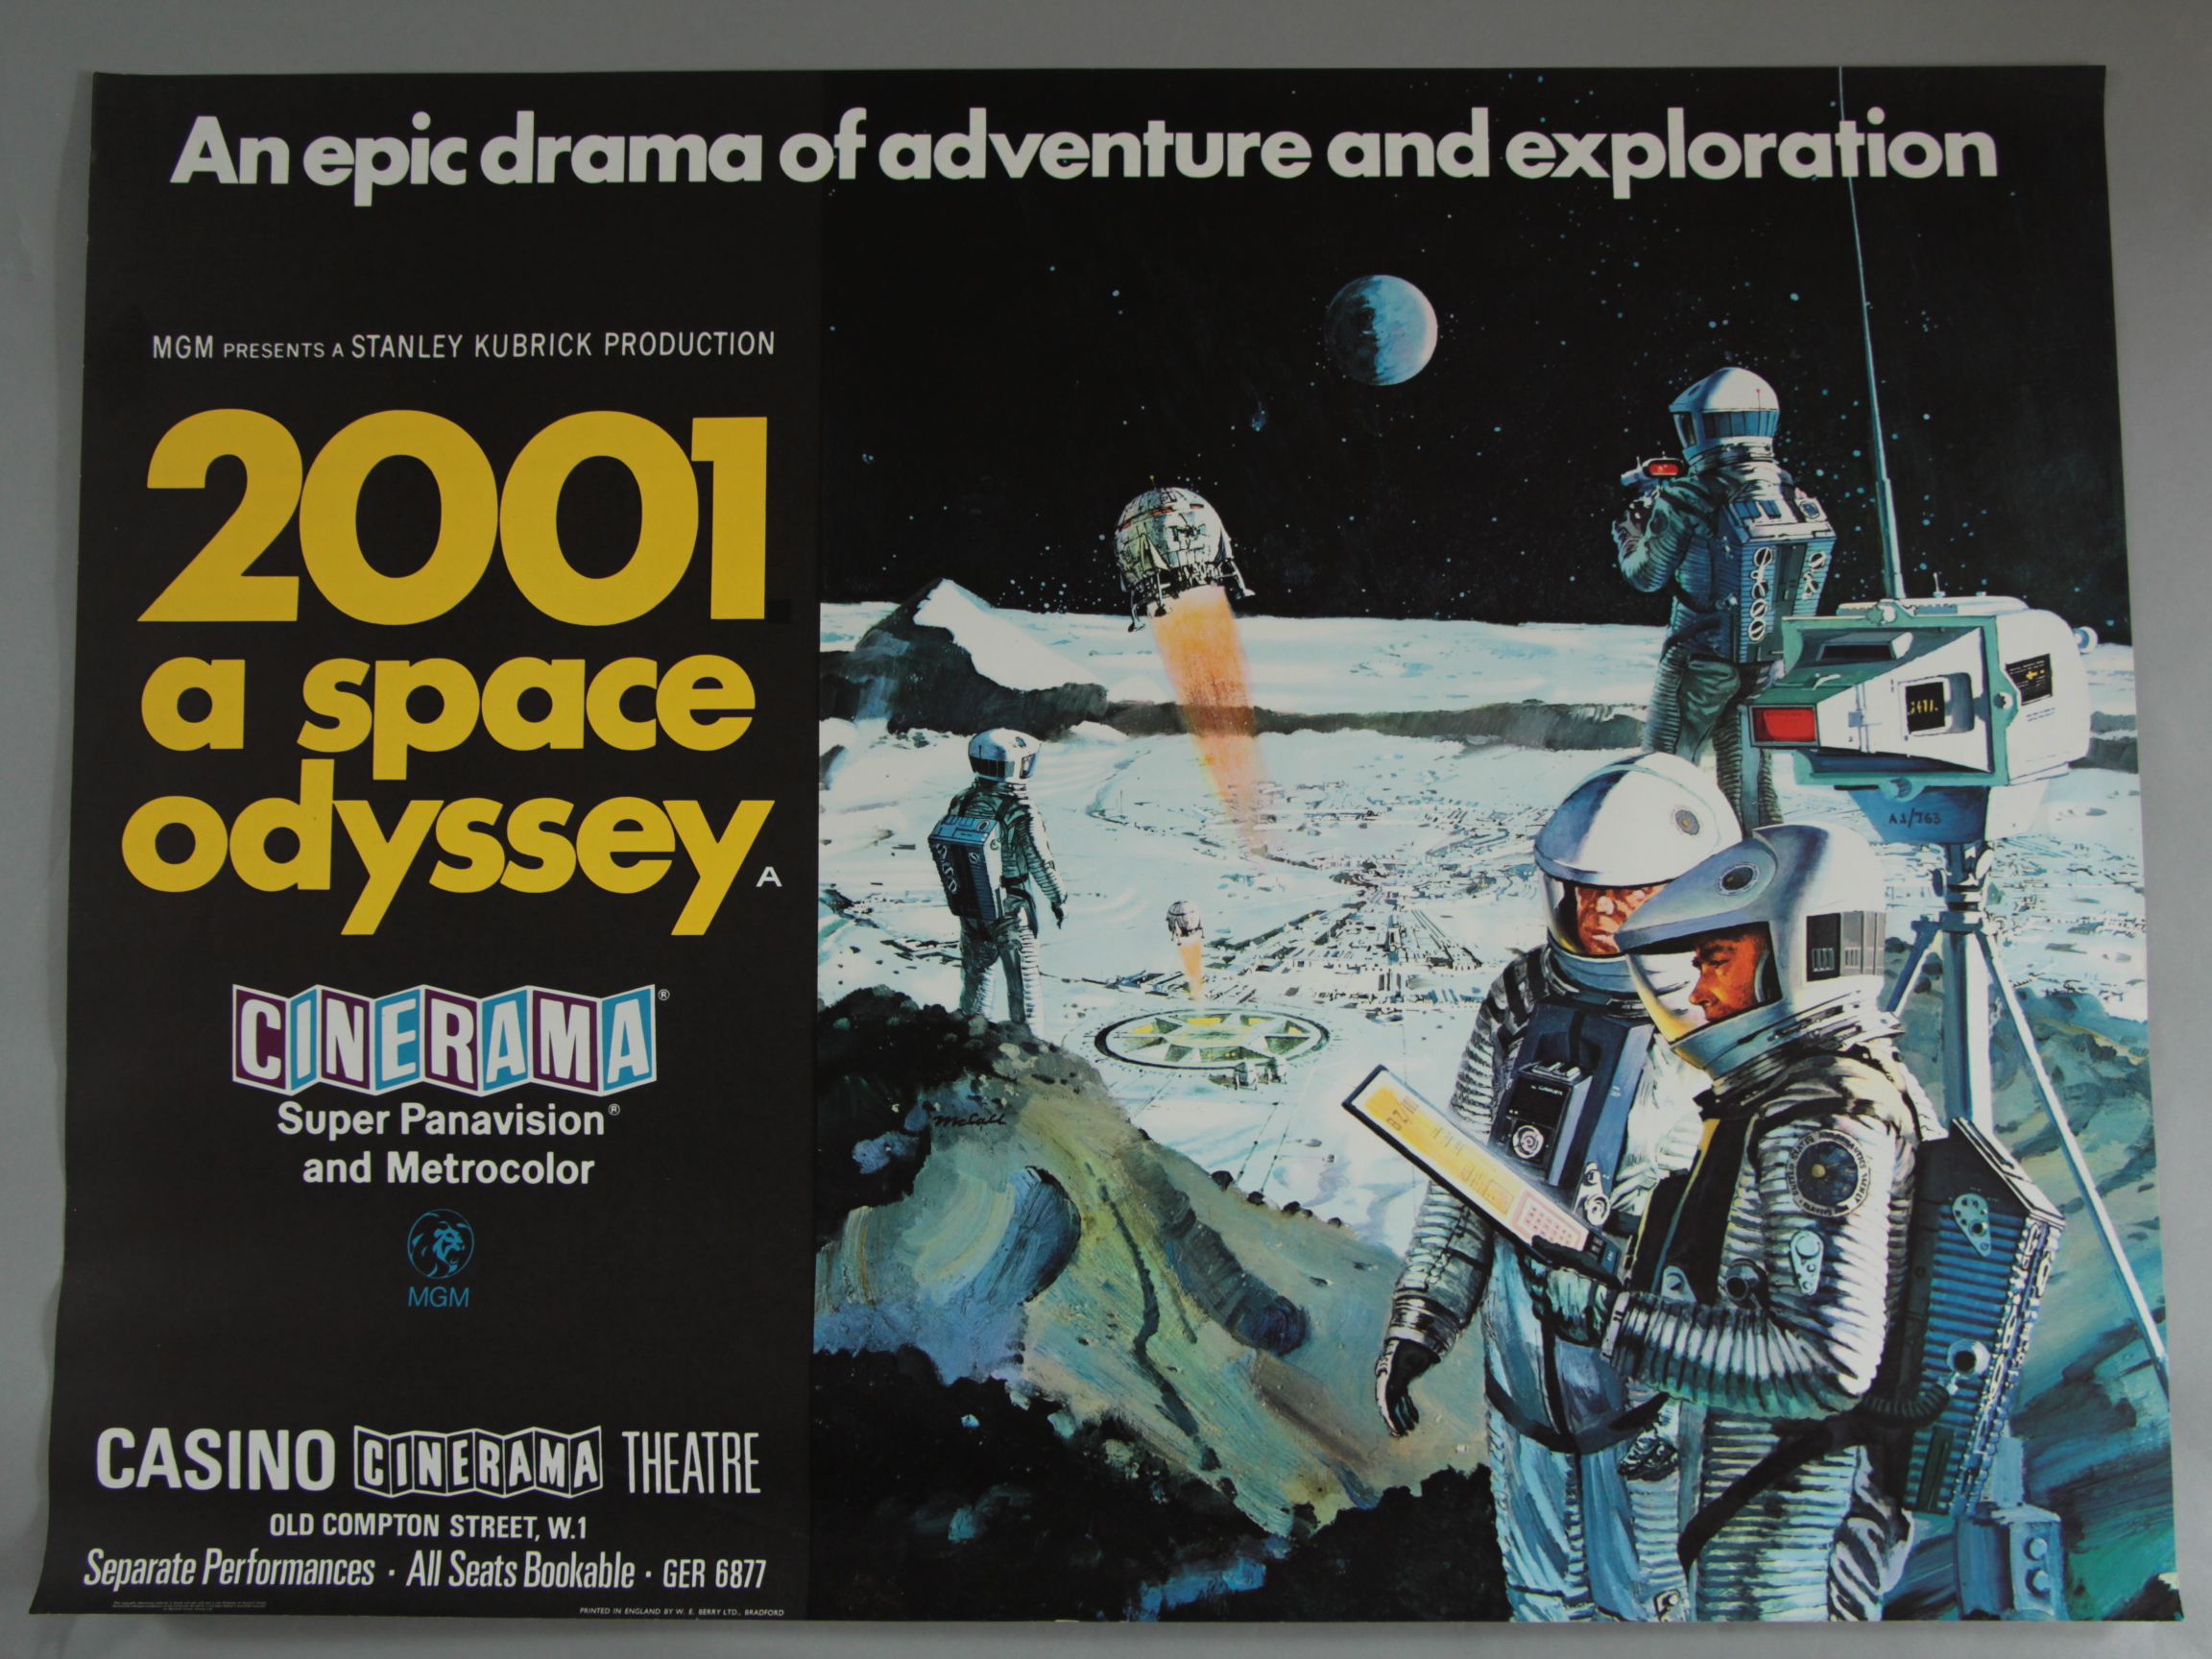 2001 A SPACE ODYSSEY 1968 first release British Quad film poster directed by Stanley Kubrick